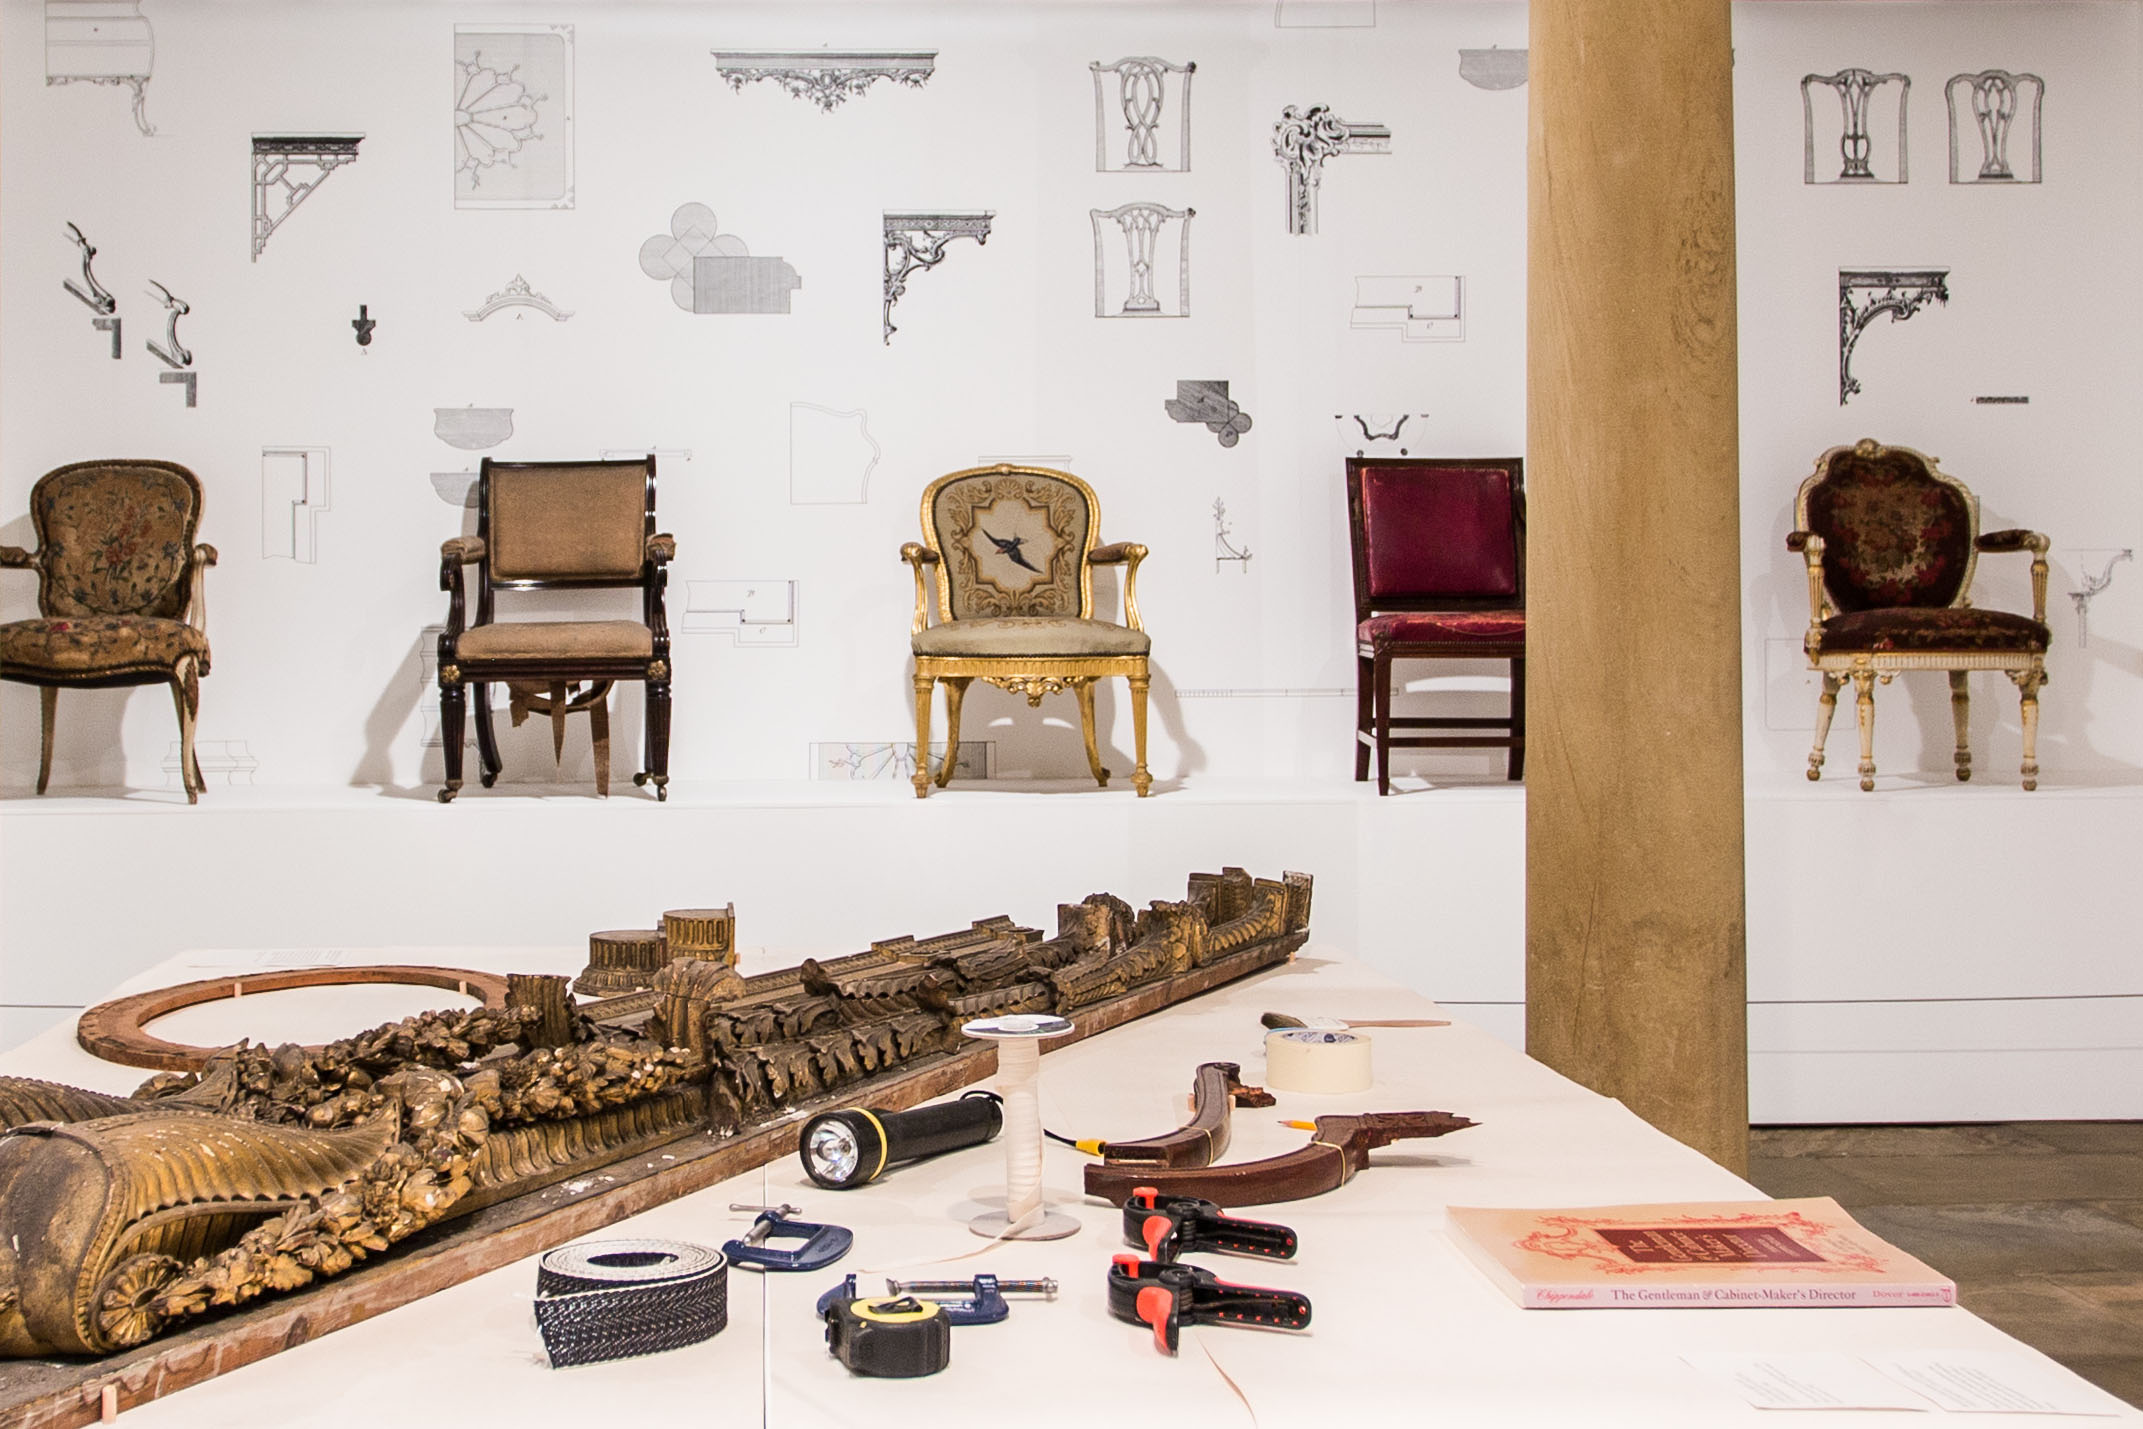 Wallpaper design with exhibition objects in the foreground